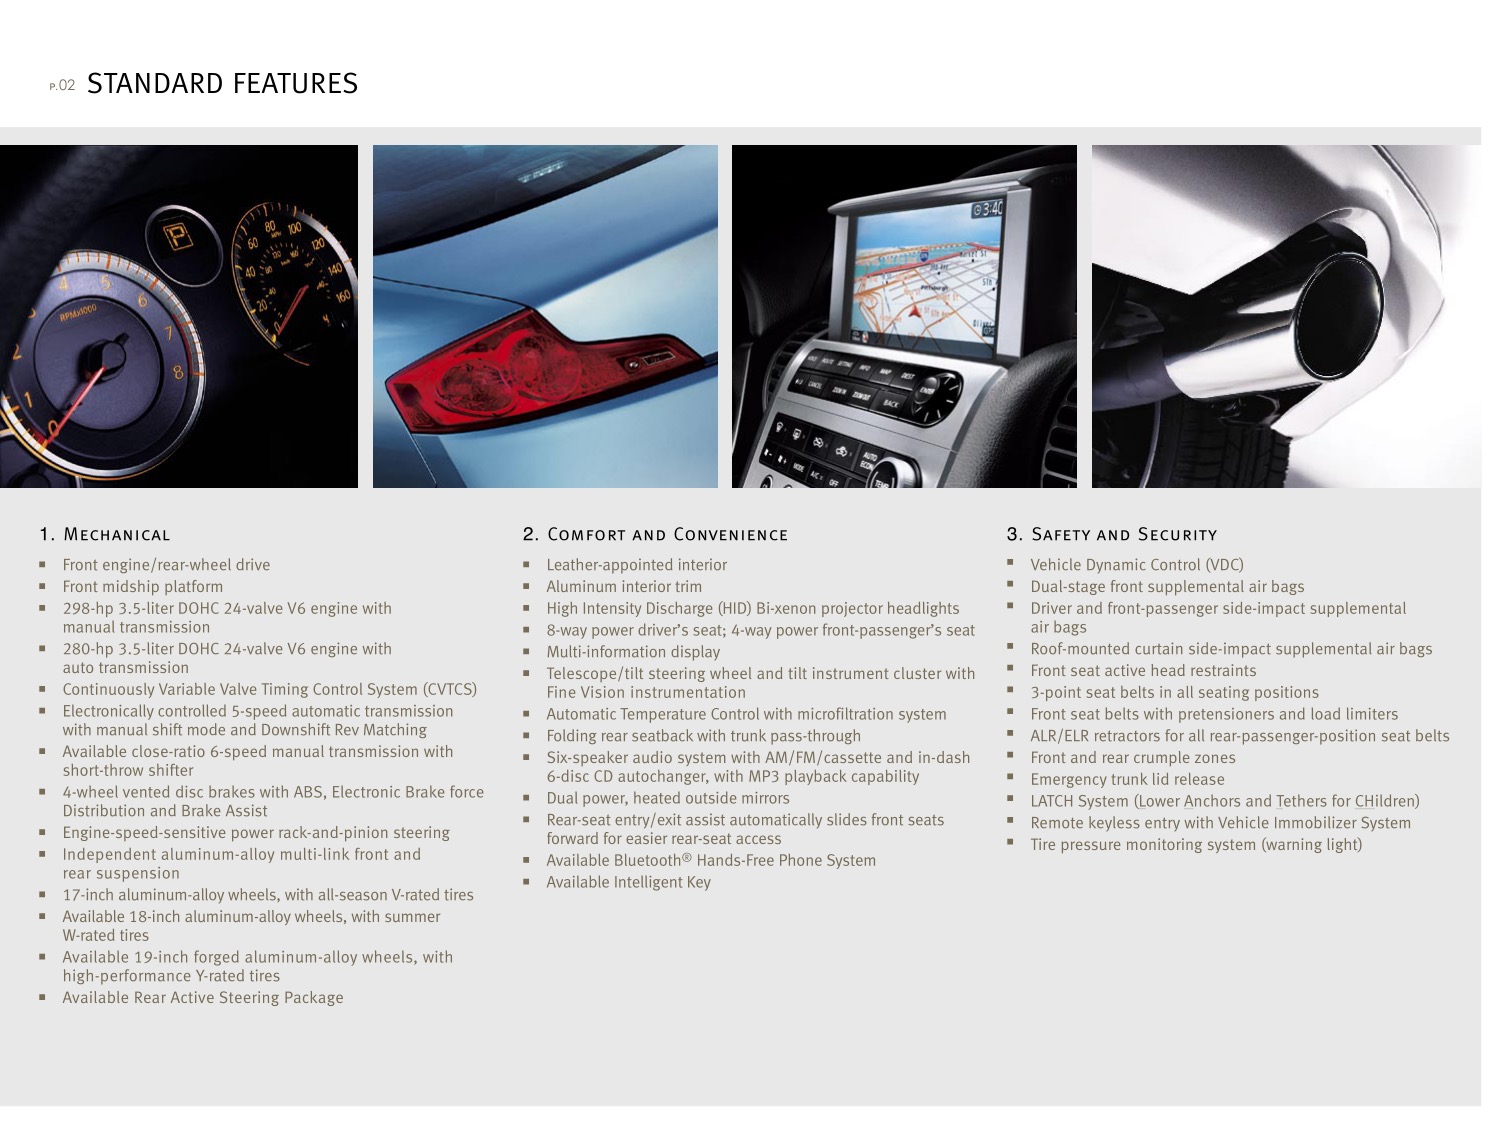 2006 Infiniti G Coupe Brochure Page 4